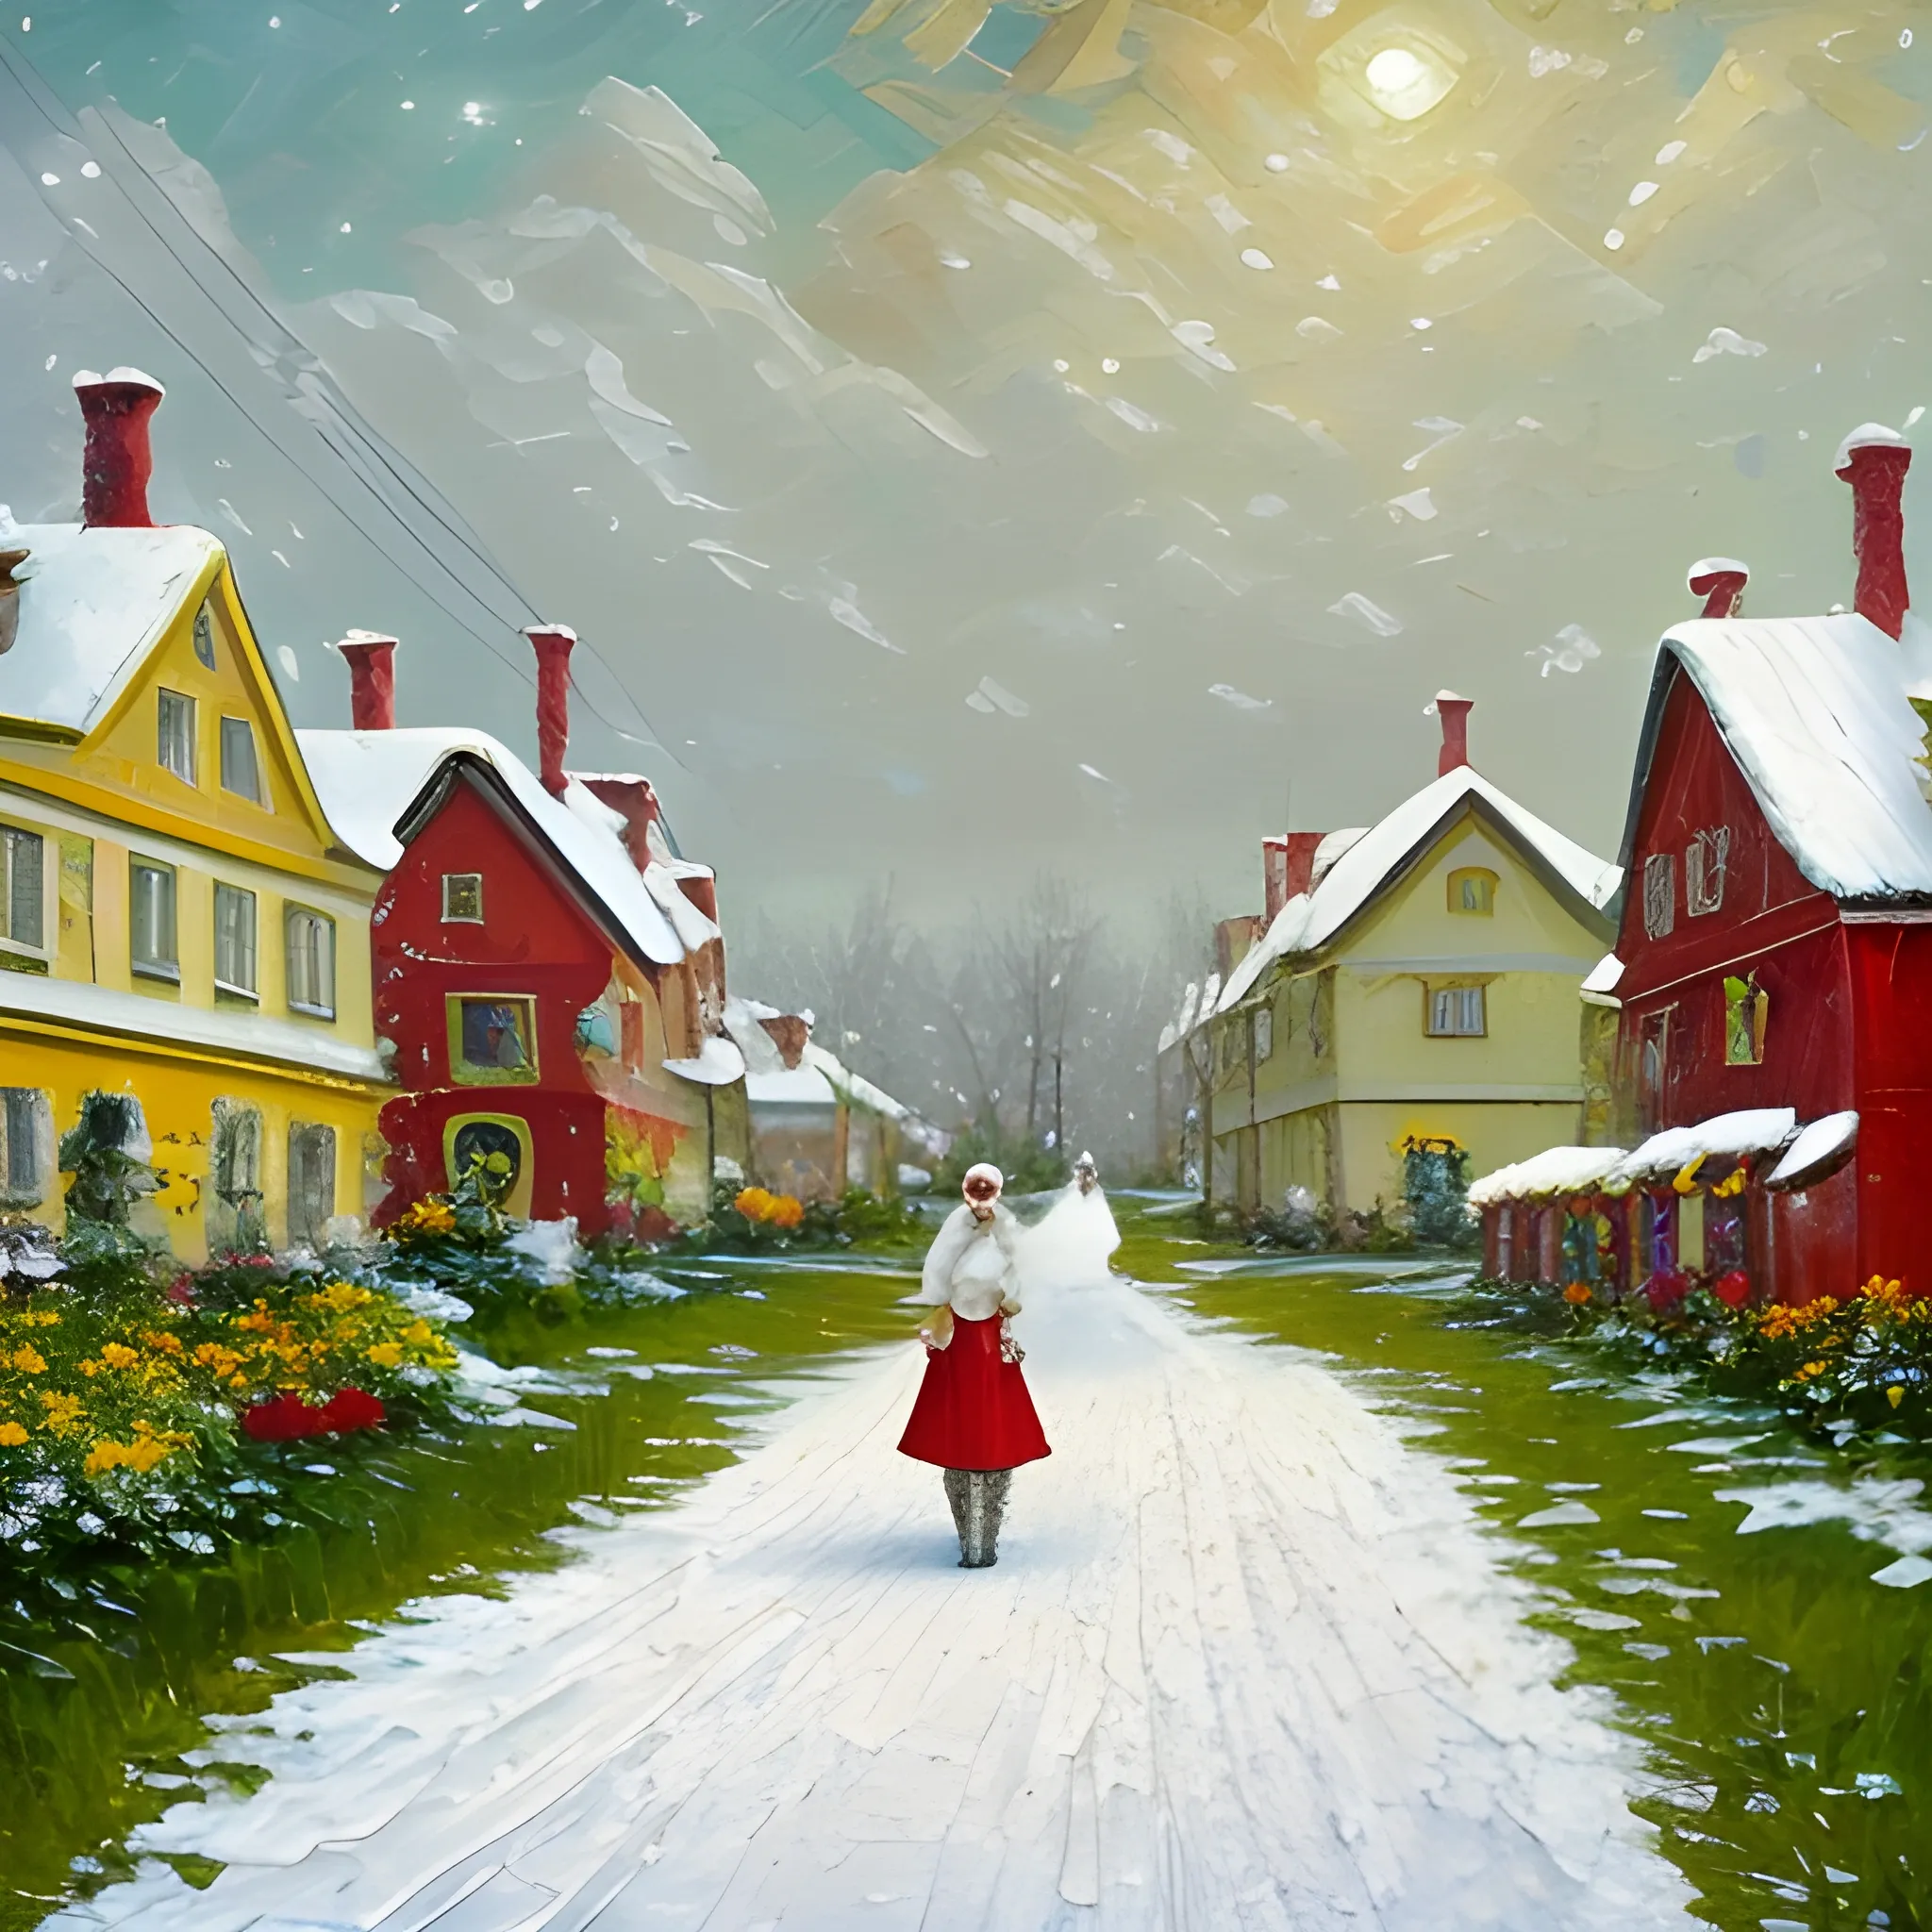 Russian landscape snowing, black-haired woman in the middle of the landscape holding a furry white cat, wearing a light red dress, old Russian-style houses in the background and the green floor with yellow flowers shows, , , Oil Painting